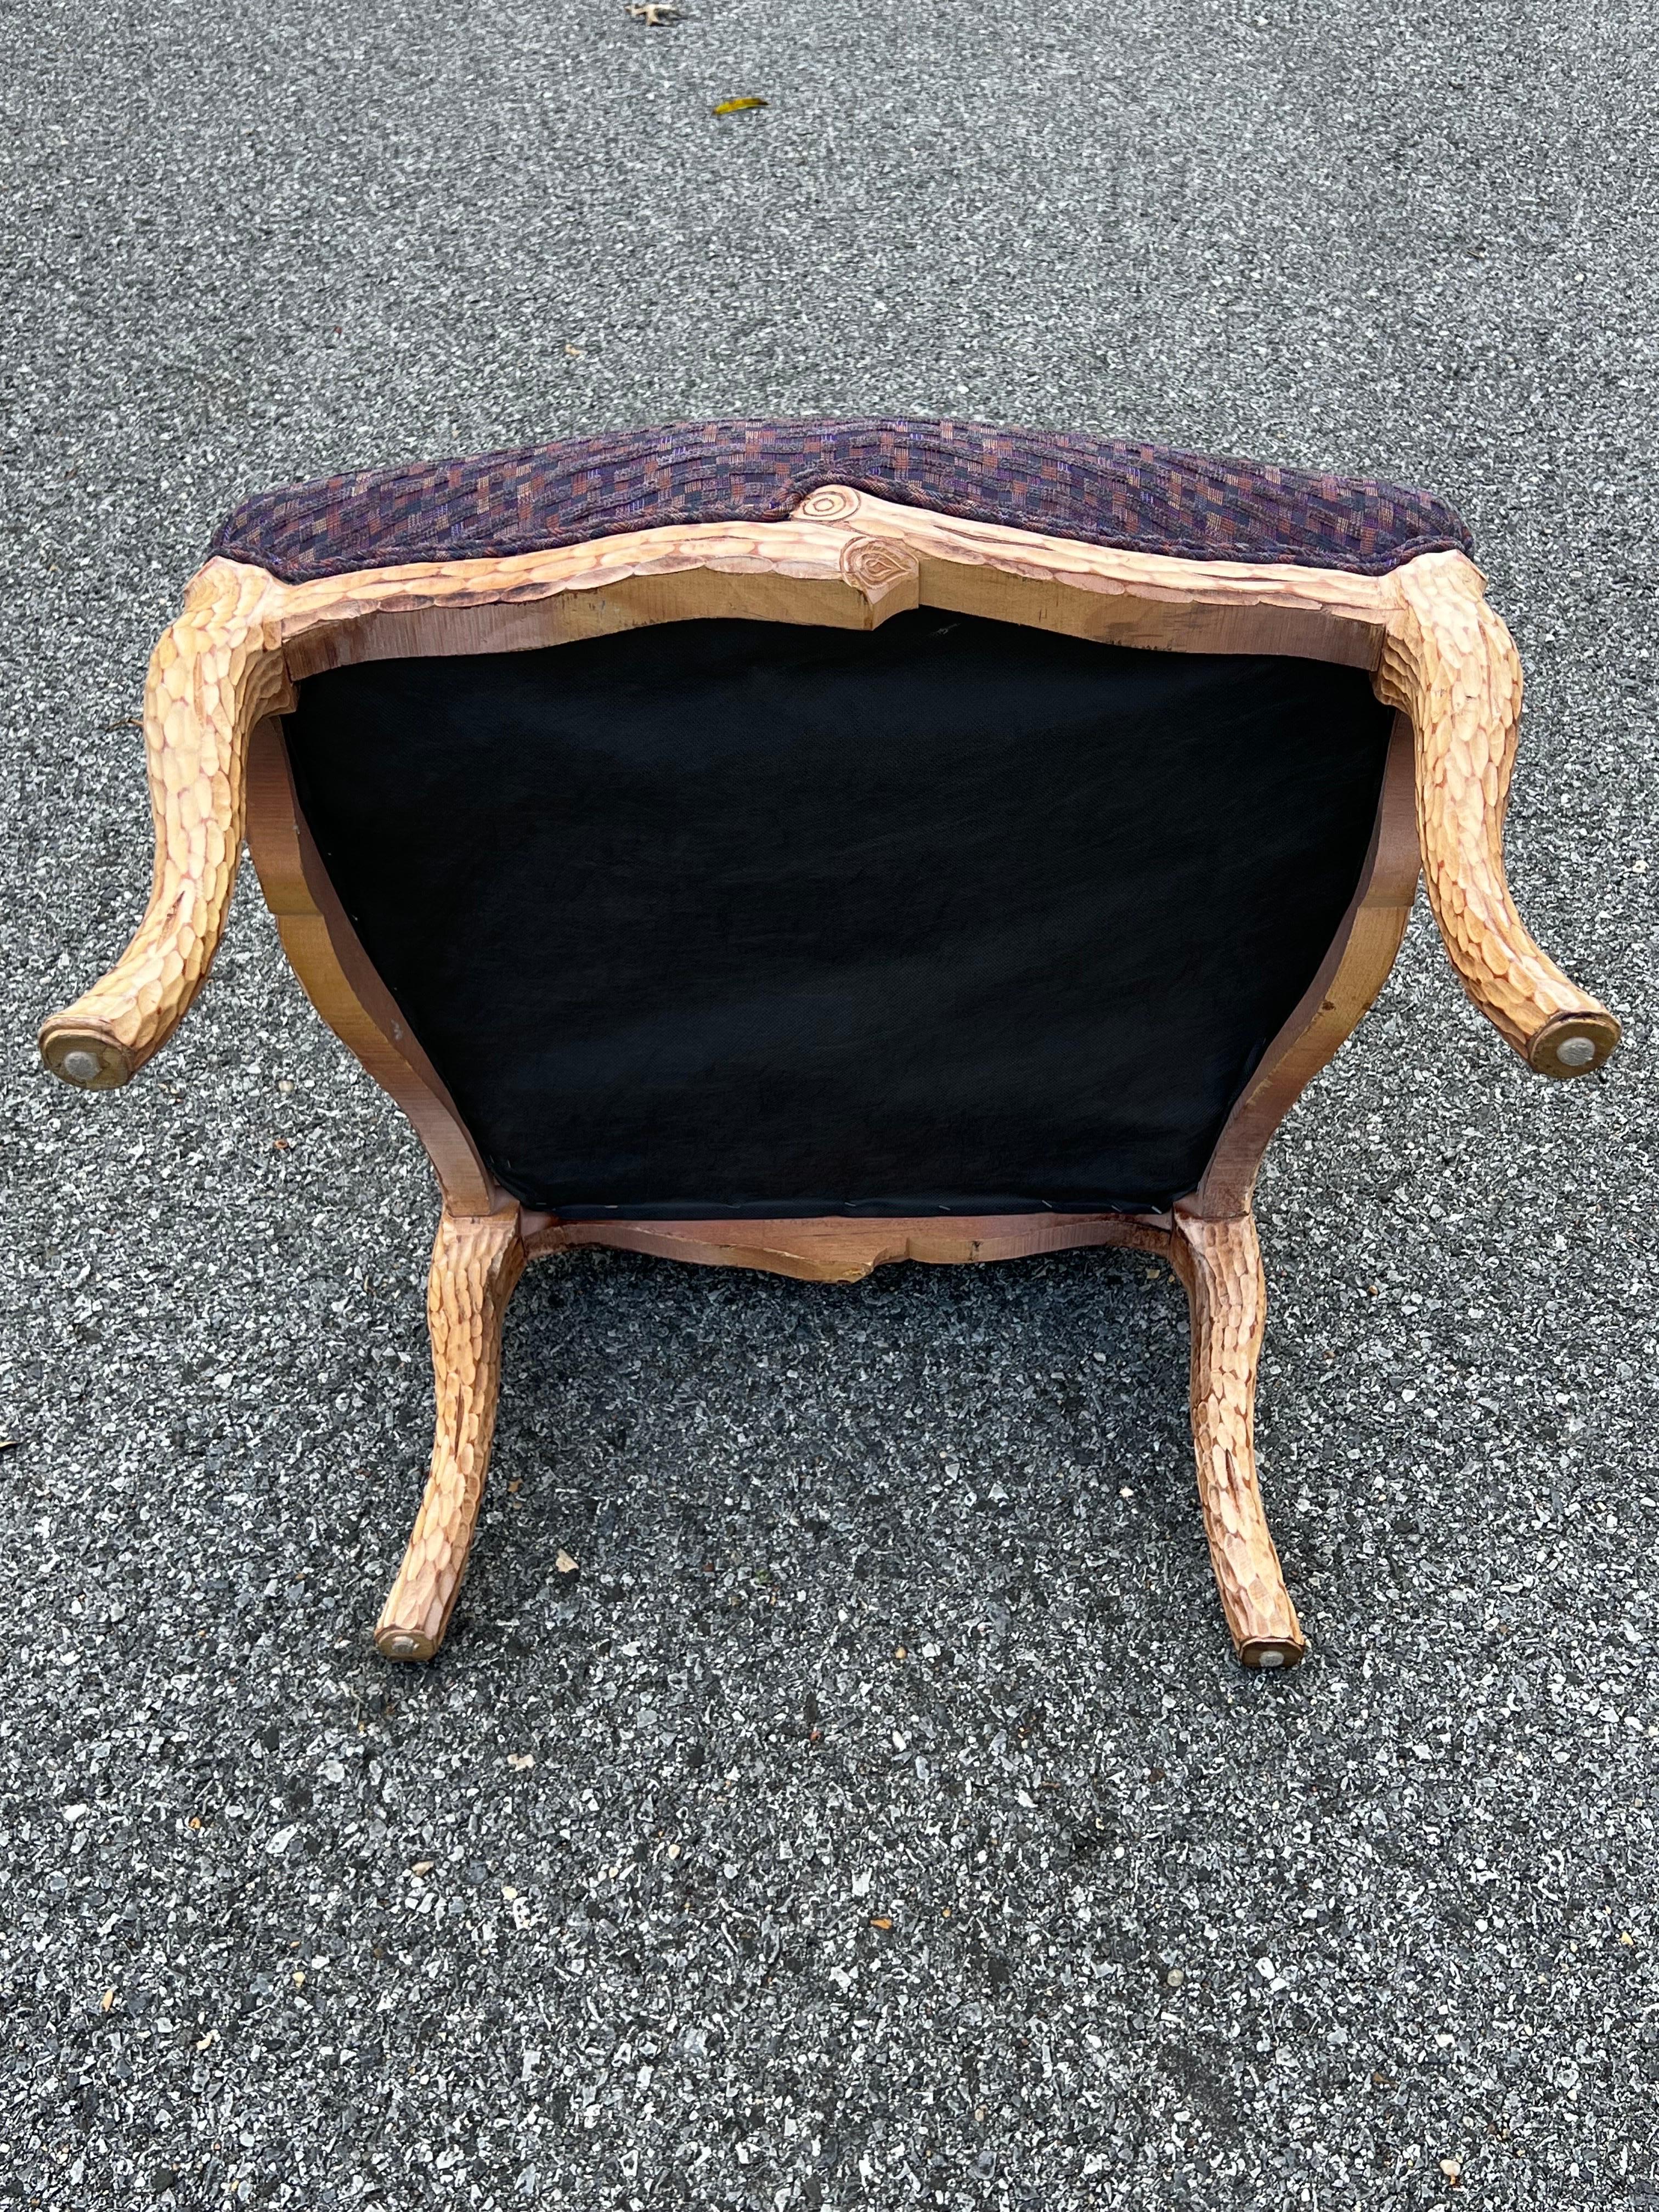 Stunning Pair of Louis XV inspired faux bois armchairs upholstered in deep purple chenille like fabric. . Hand-carved wood frames are finished in an ivory glaze. Cabriole front and back legs. Chairs have no labels, we can’t determine exact age, we